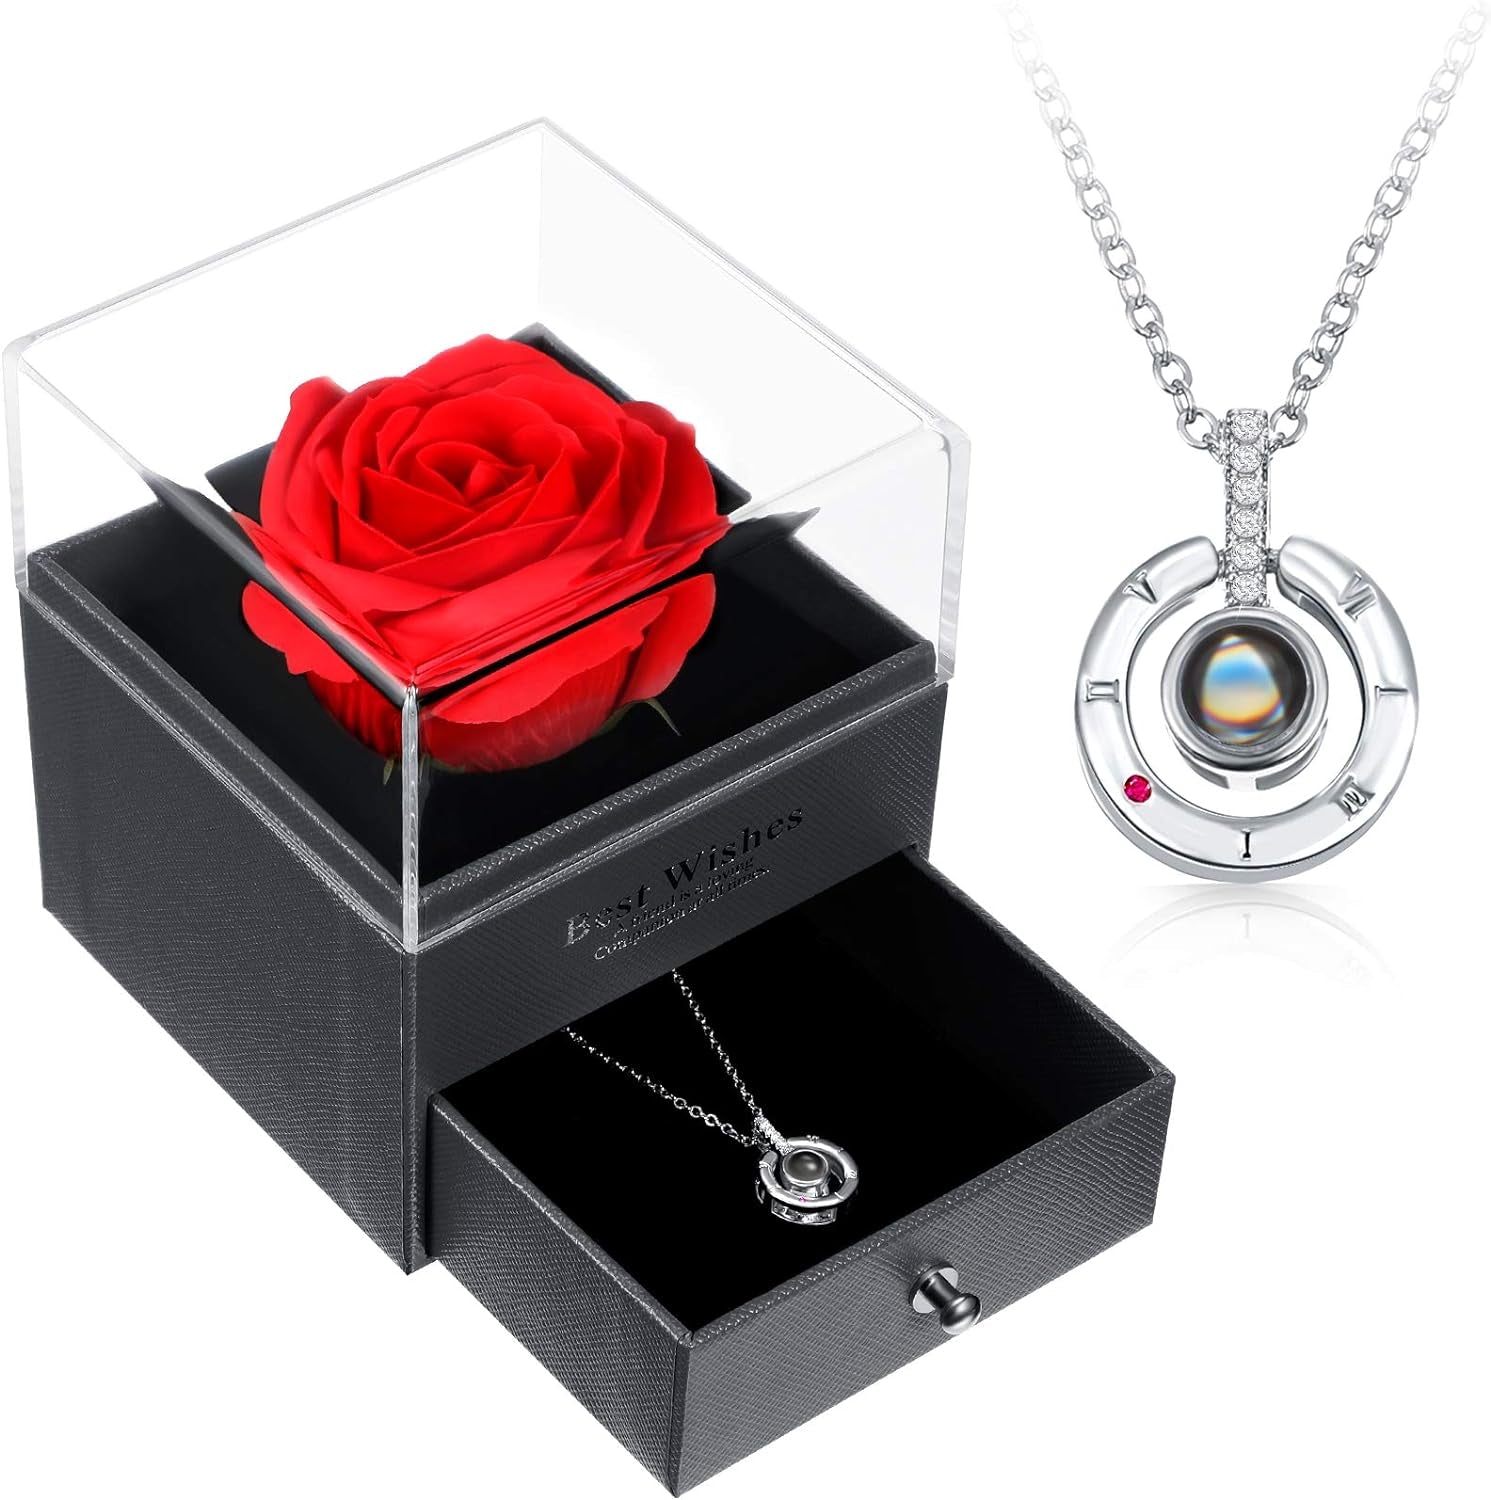 I Love You Necklace 100 Languages Projection Pendant Necklace with Red Rose Package Box round Crystal Pendant Loving Memory Collarbone Necklace with Rose Jewelry for Valentine'S Day